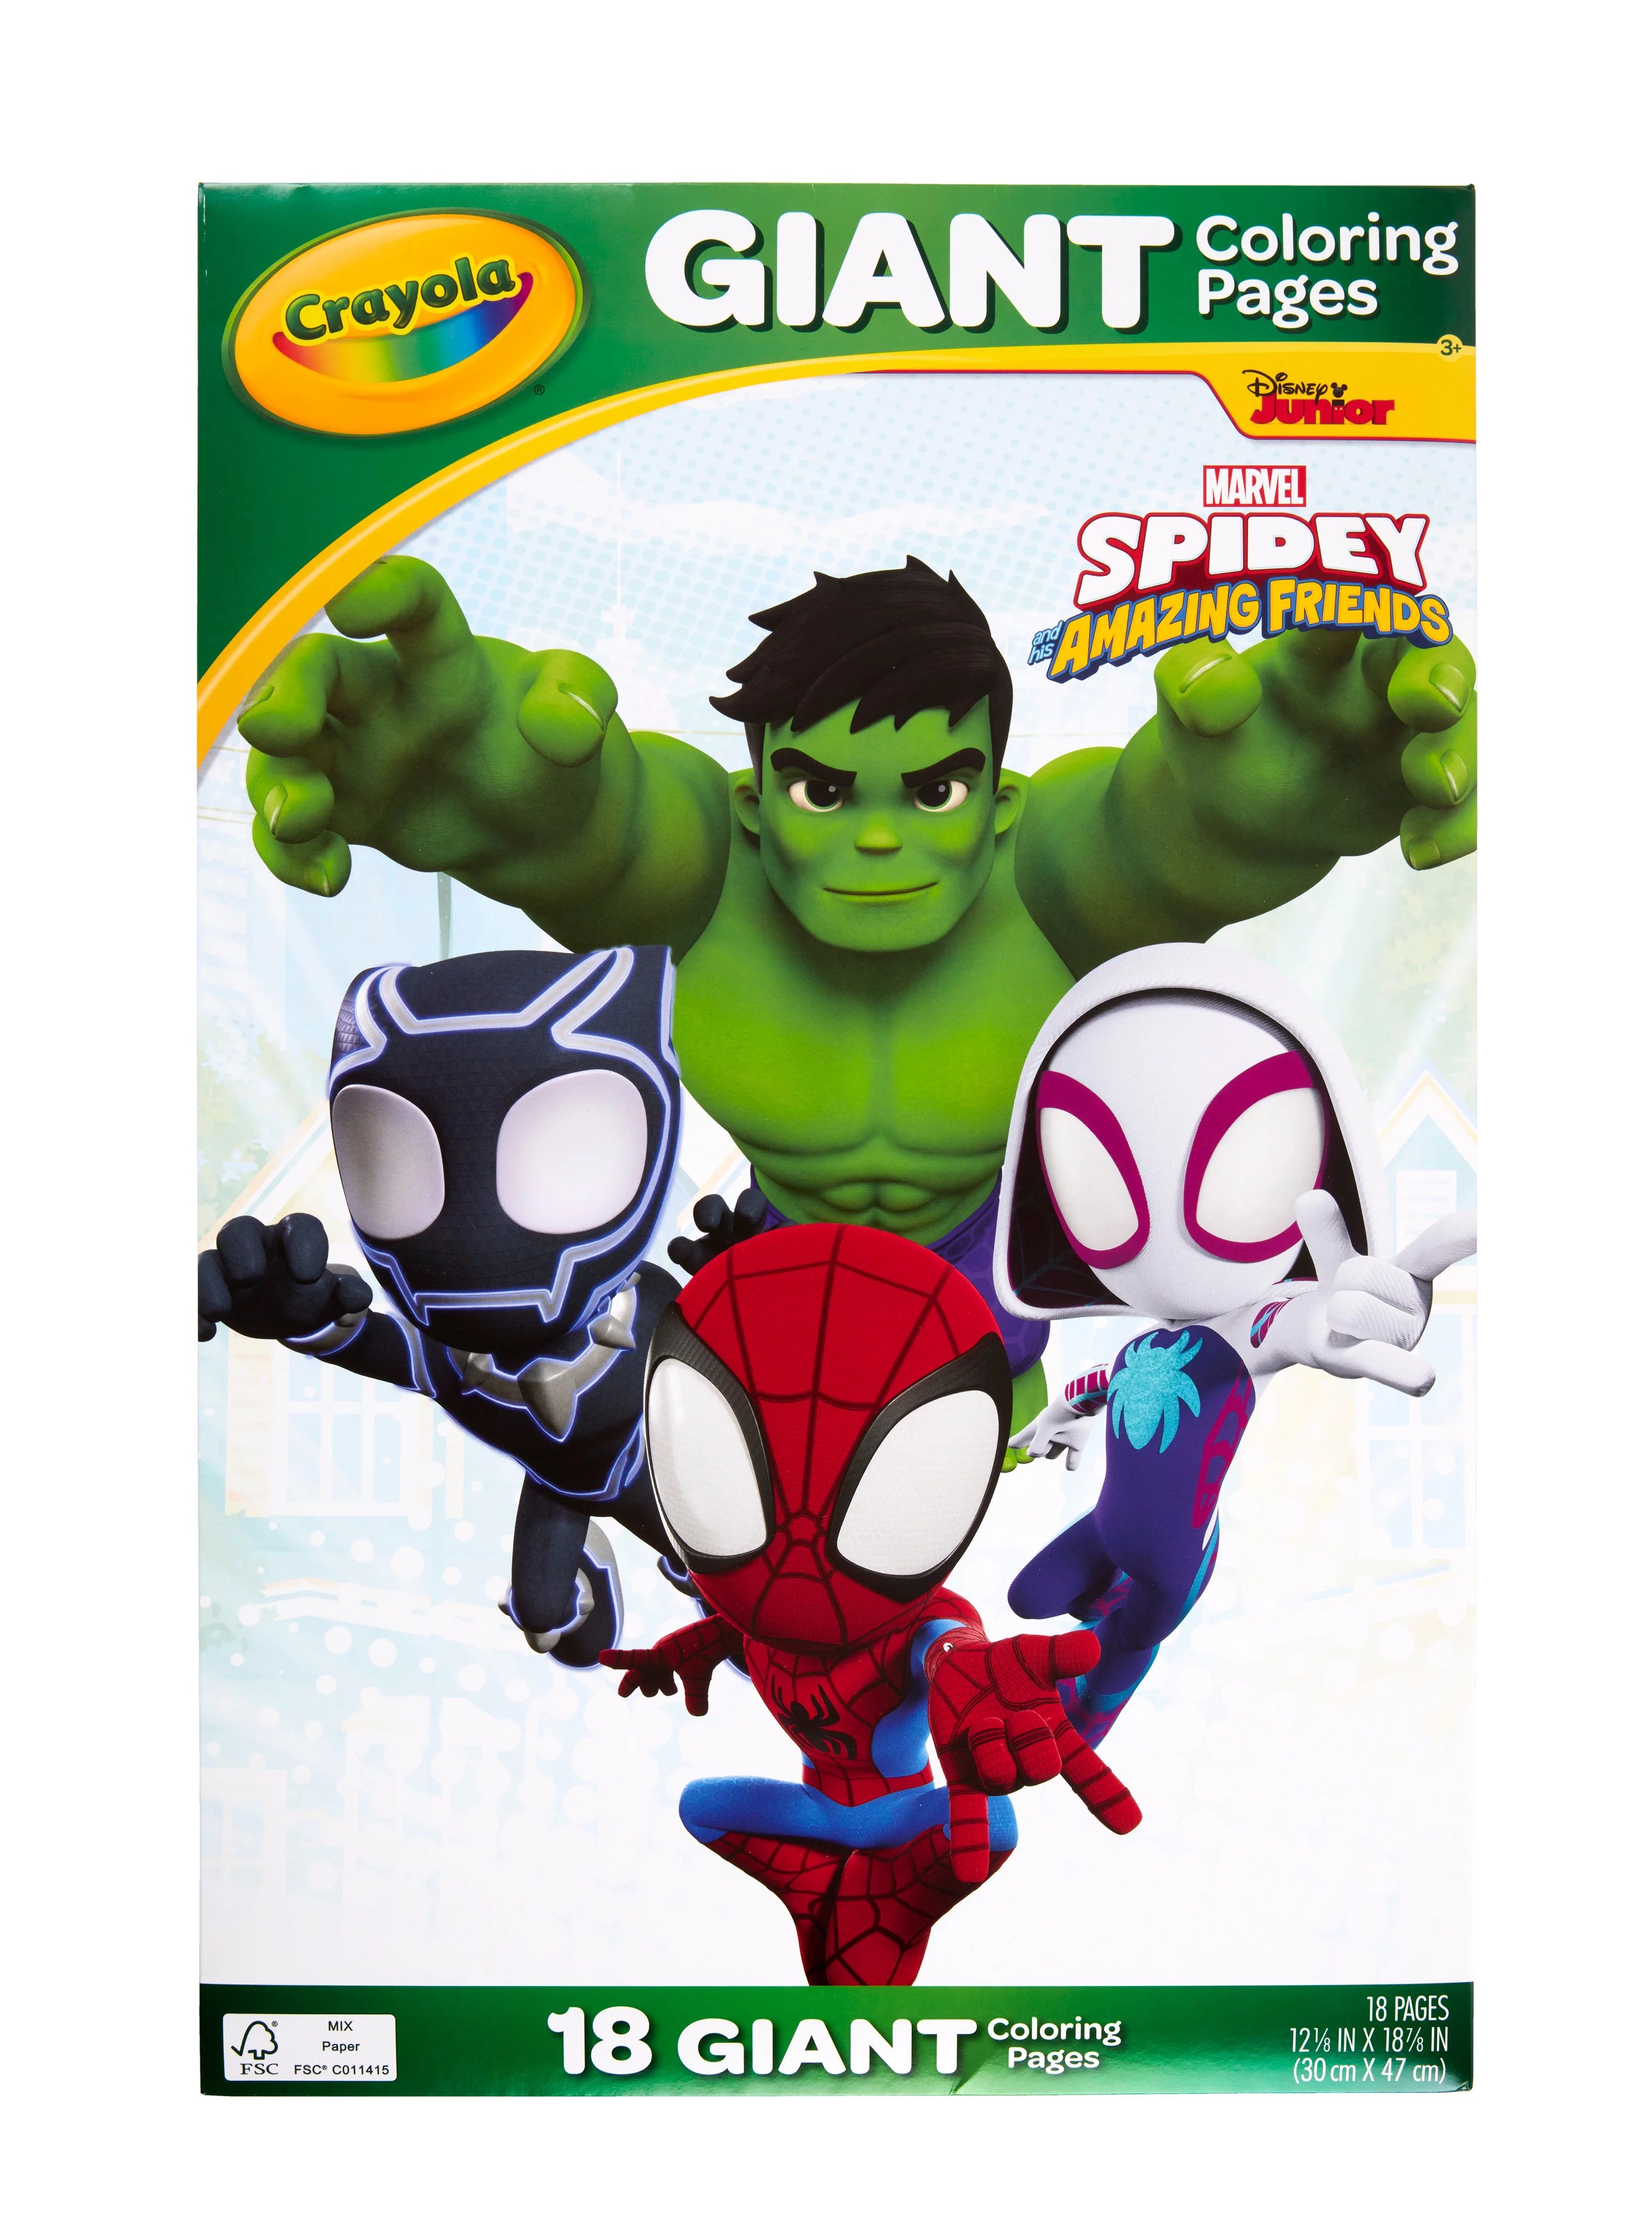 Crayola Spidey & His Amazing Friends Giant Coloring Pages, 18-Pages, Gift for Kids, Unisex Child | Walmart (US)